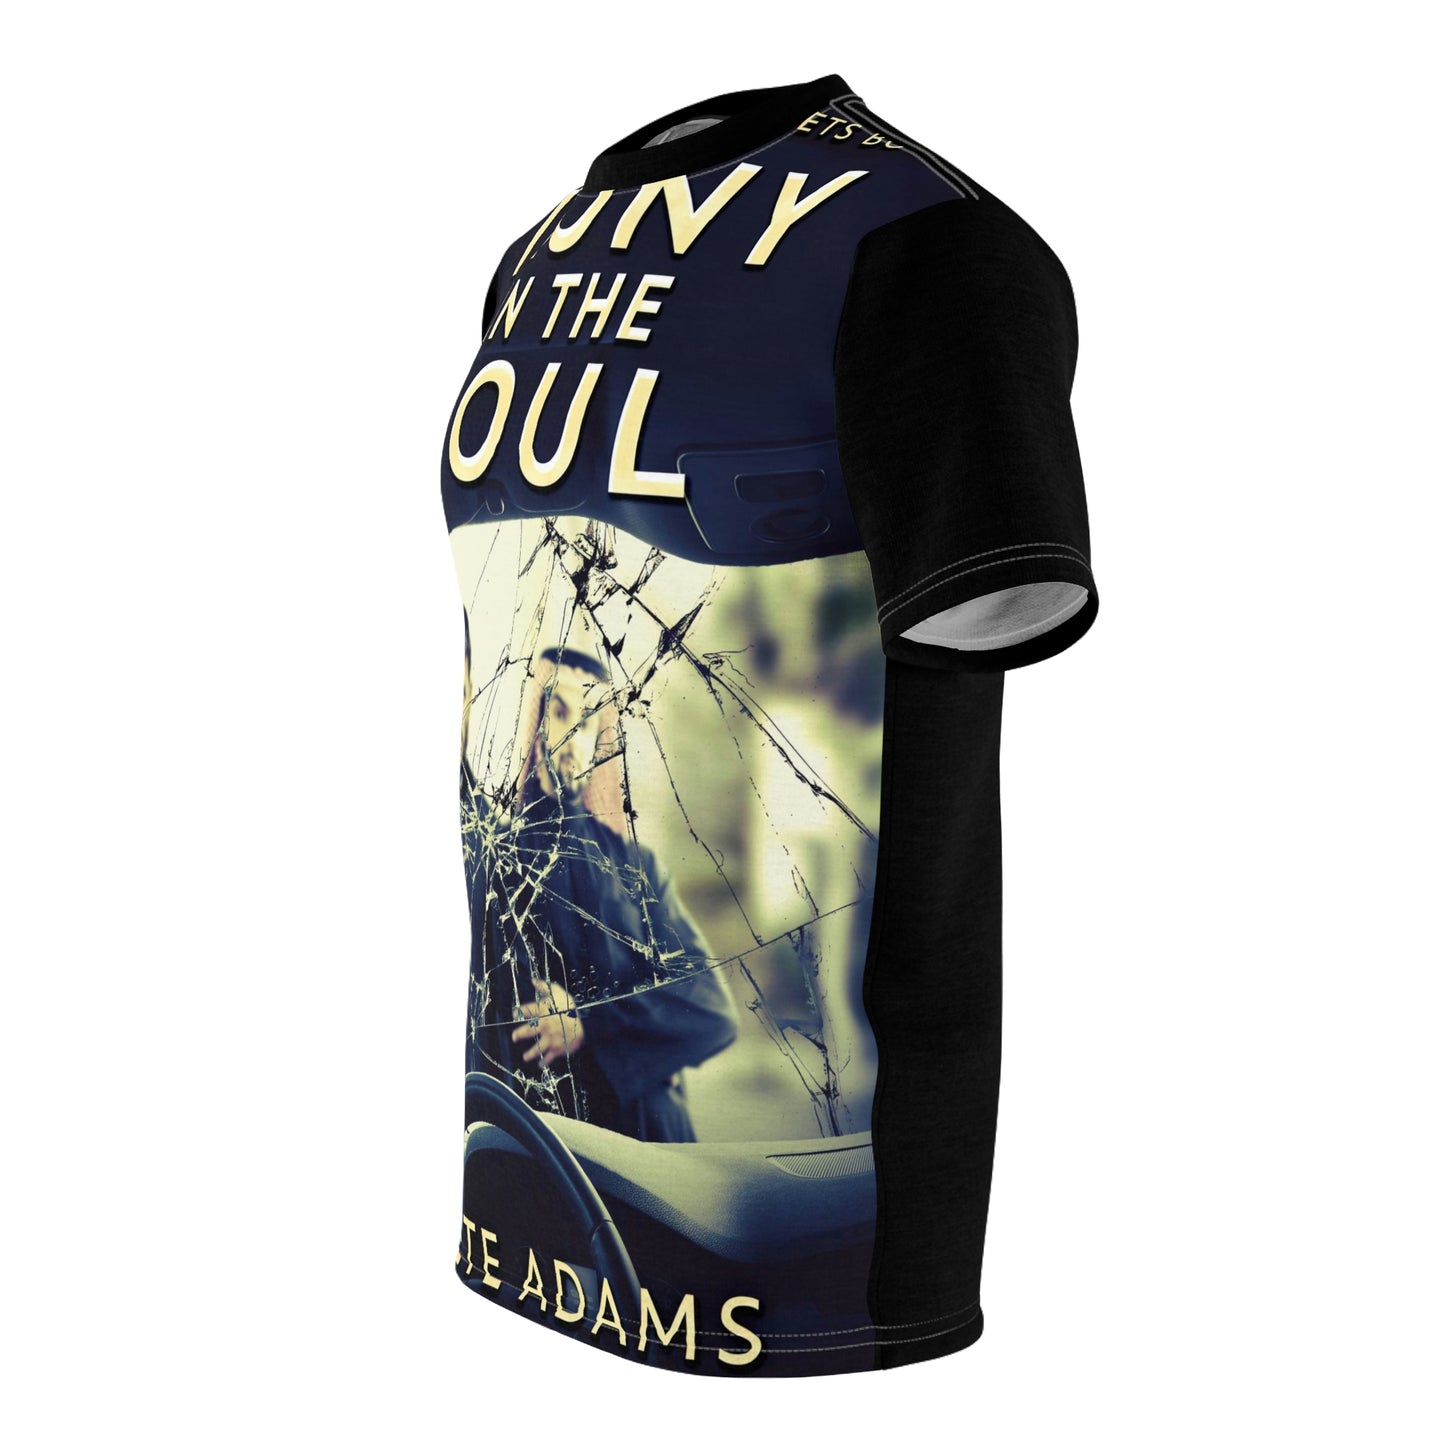 Irony In The Soul - Unisex All-Over Print Cut & Sew T-Shirt